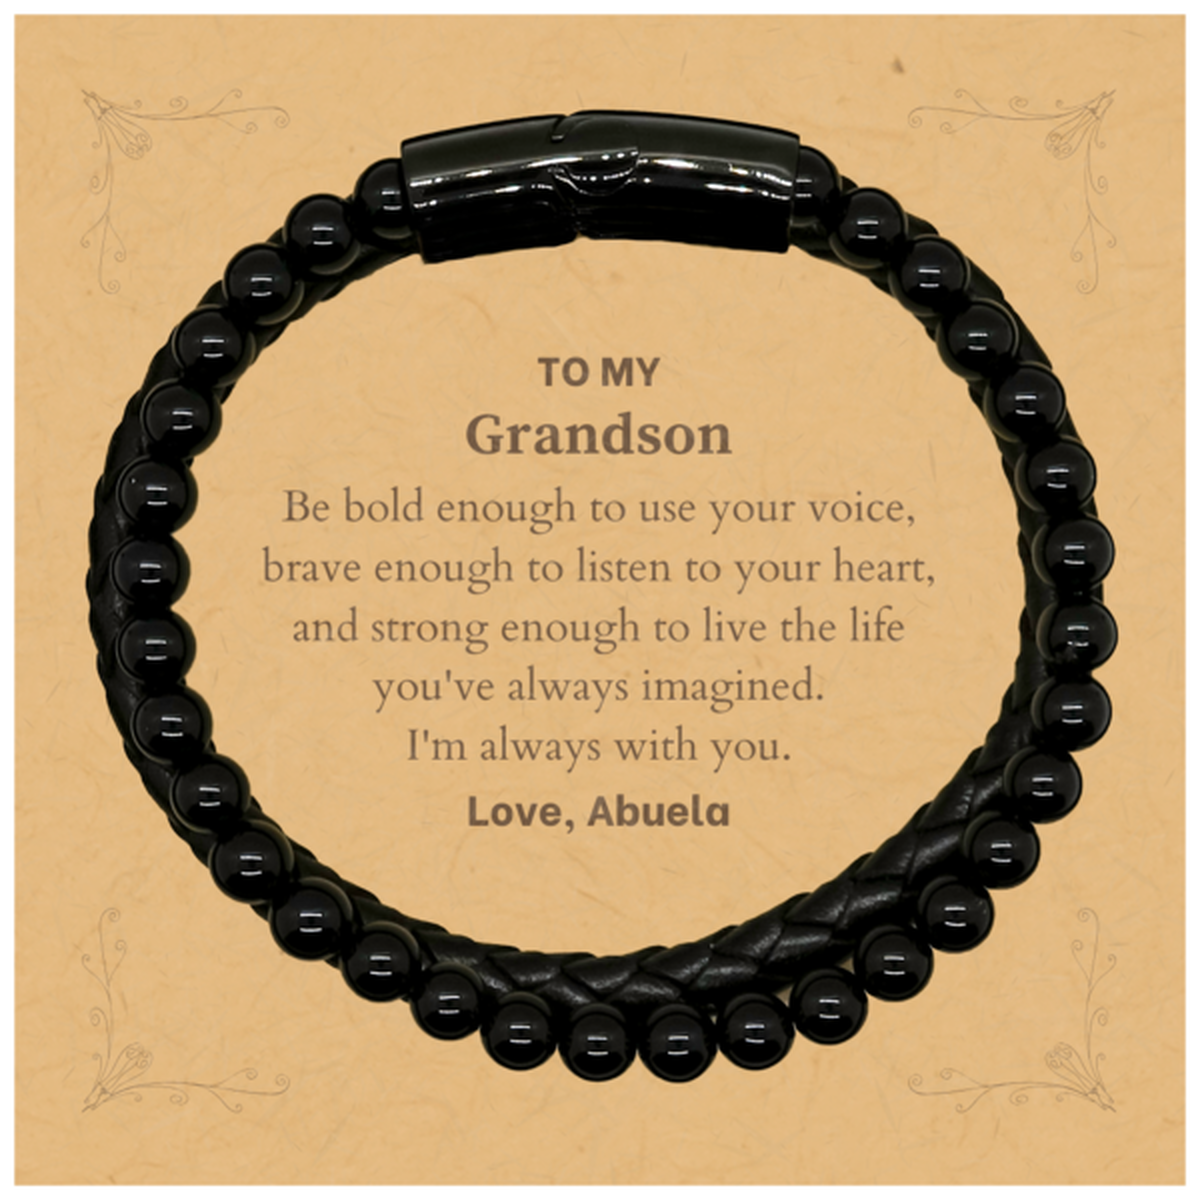 Keepsake Grandson Stone Leather Bracelets Gift Idea Graduation Christmas Birthday Grandson from Abuela, Grandson Be bold enough to use your voice, brave enough to listen to your heart. Love, Abuela